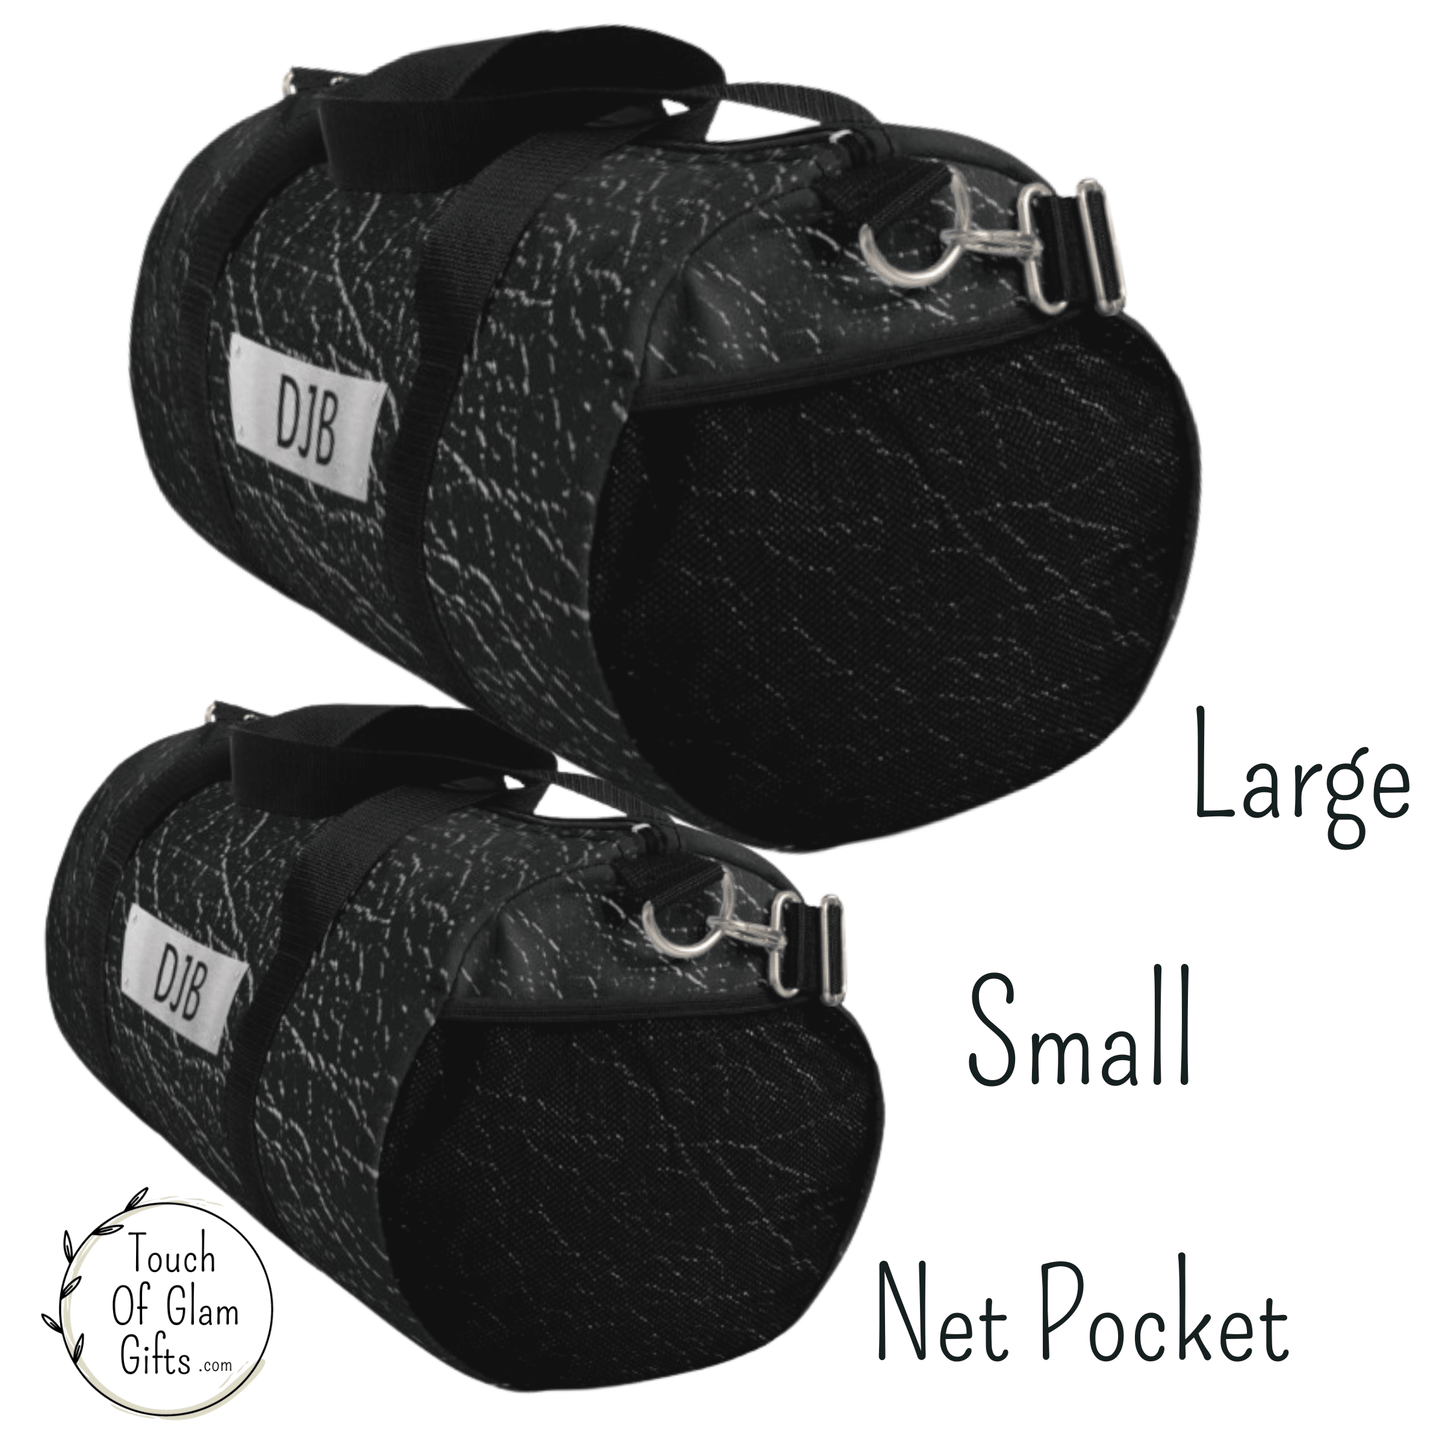 The left side of our mens duffel bag shows a net pocket on the small carry on size bag for men and the large weekender bag. Both can be personalized and make the perfect birthday gift for men.